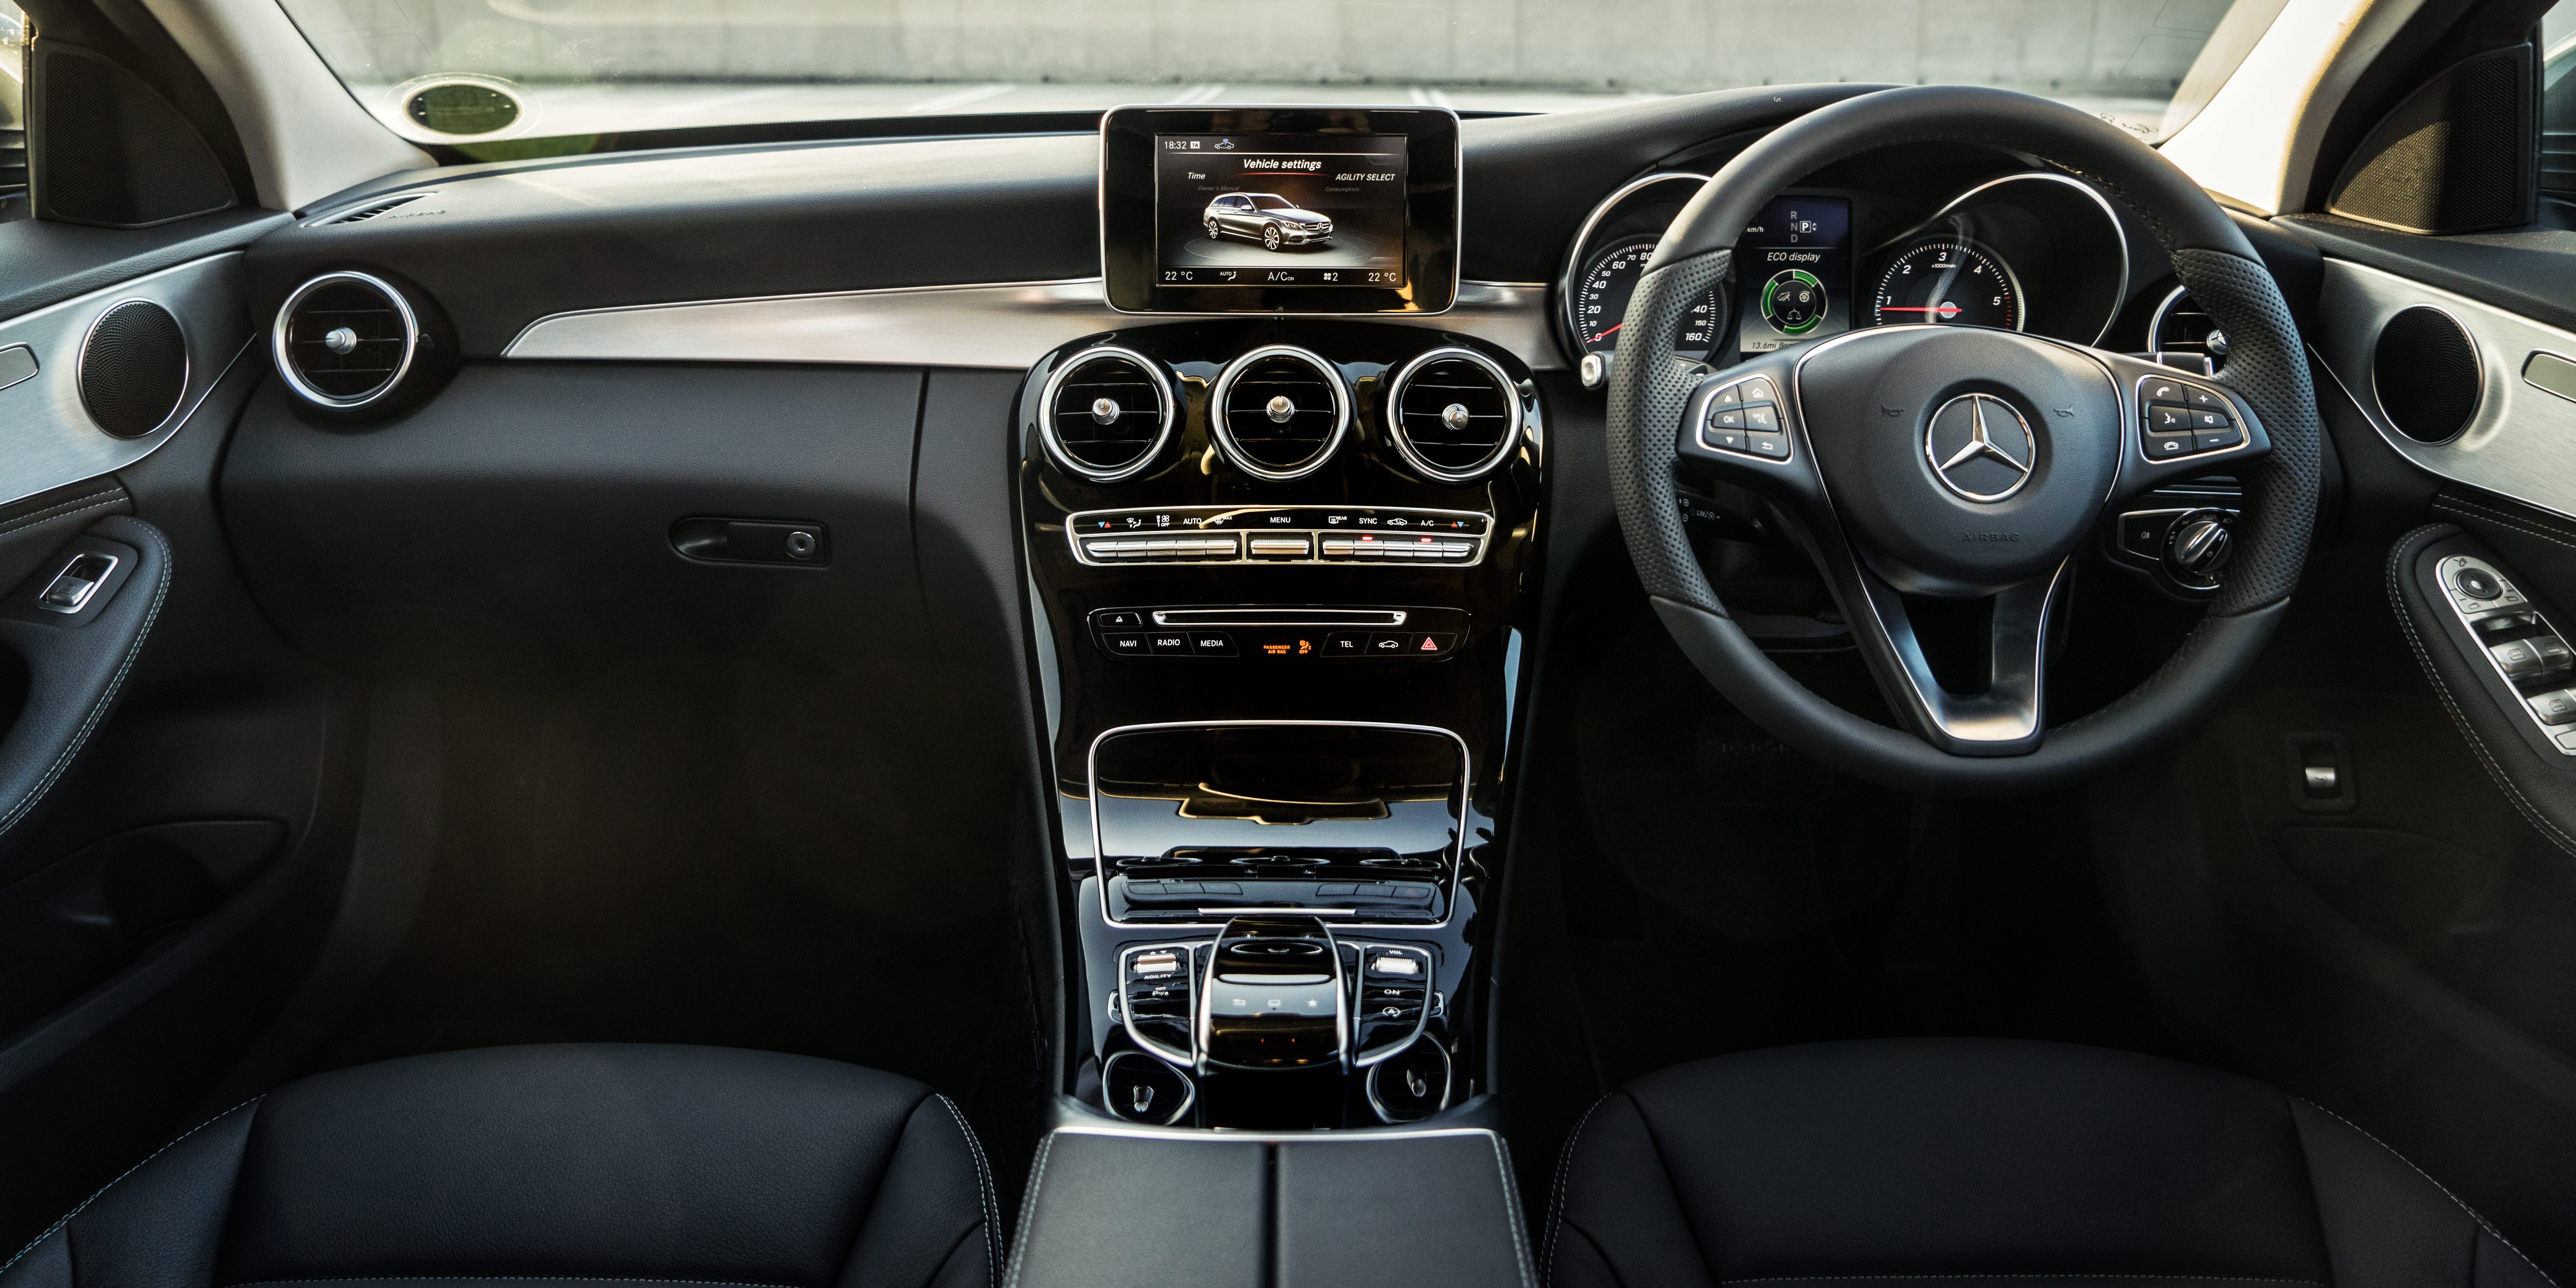 The dash looks lovely – the thick-bezelled infotainment screen less so